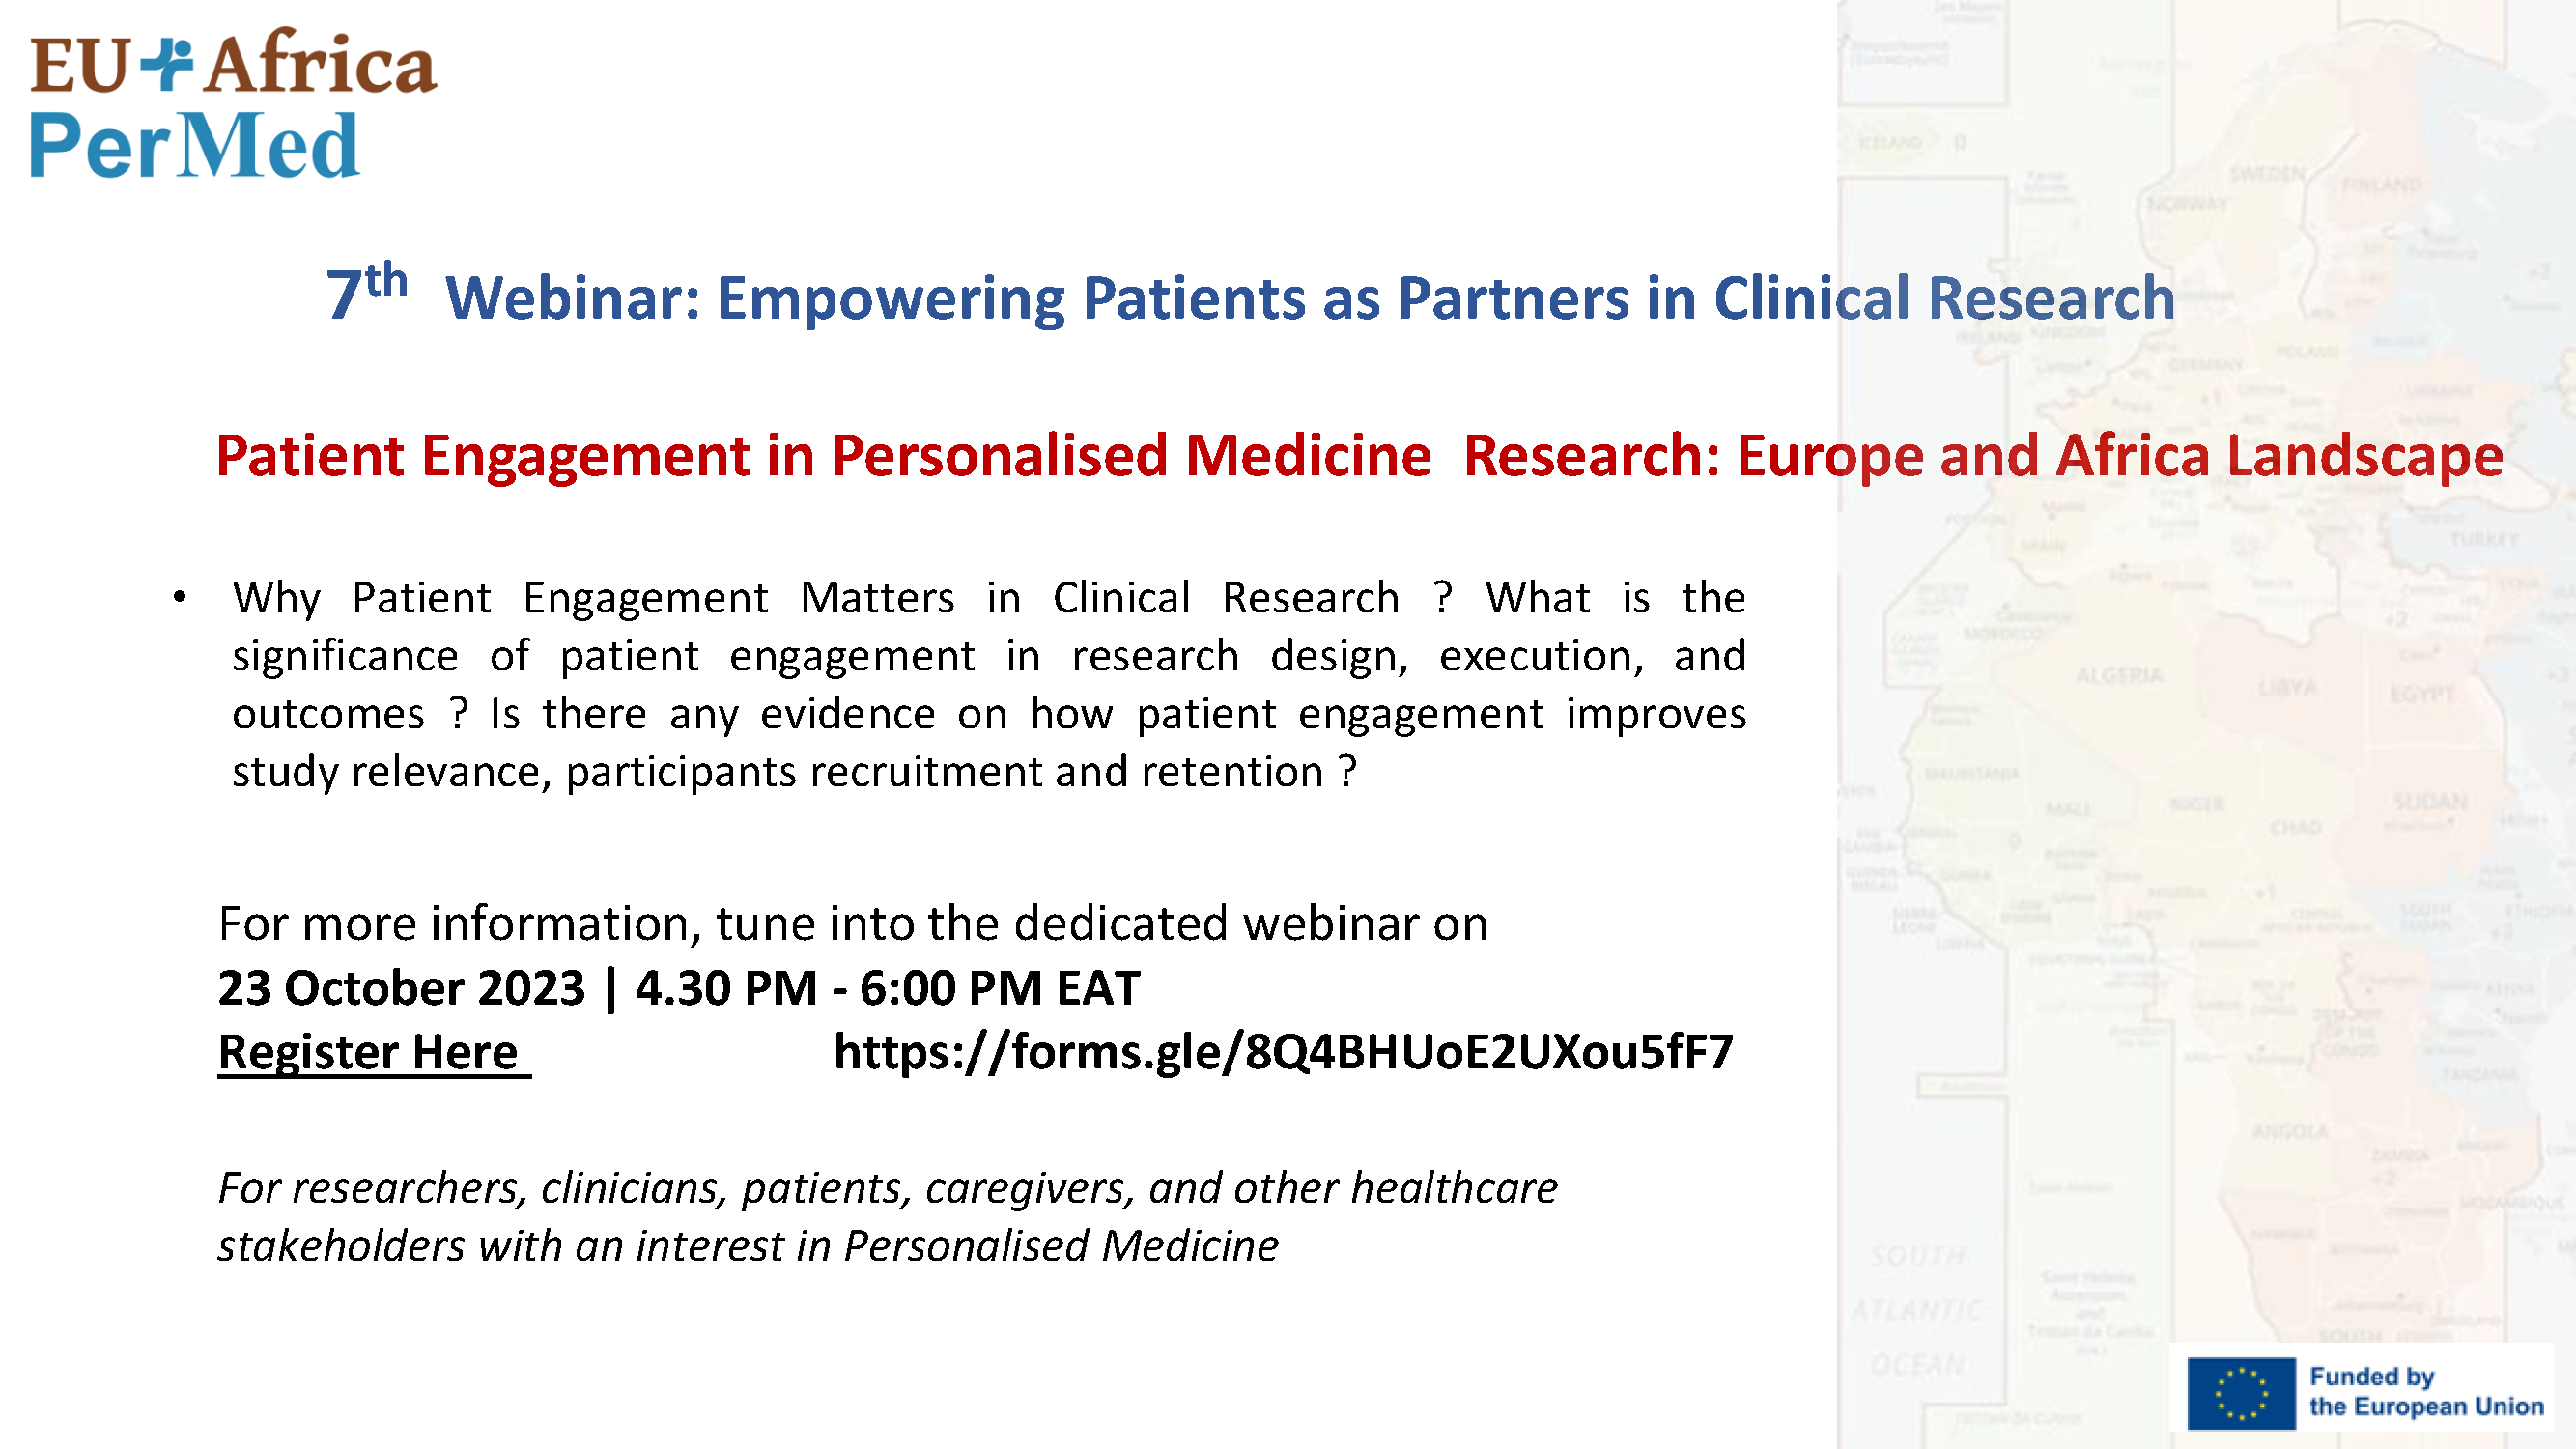  Empowering Patients as Partners in Clinical Research  EU-Africa PerMed   Webinar 